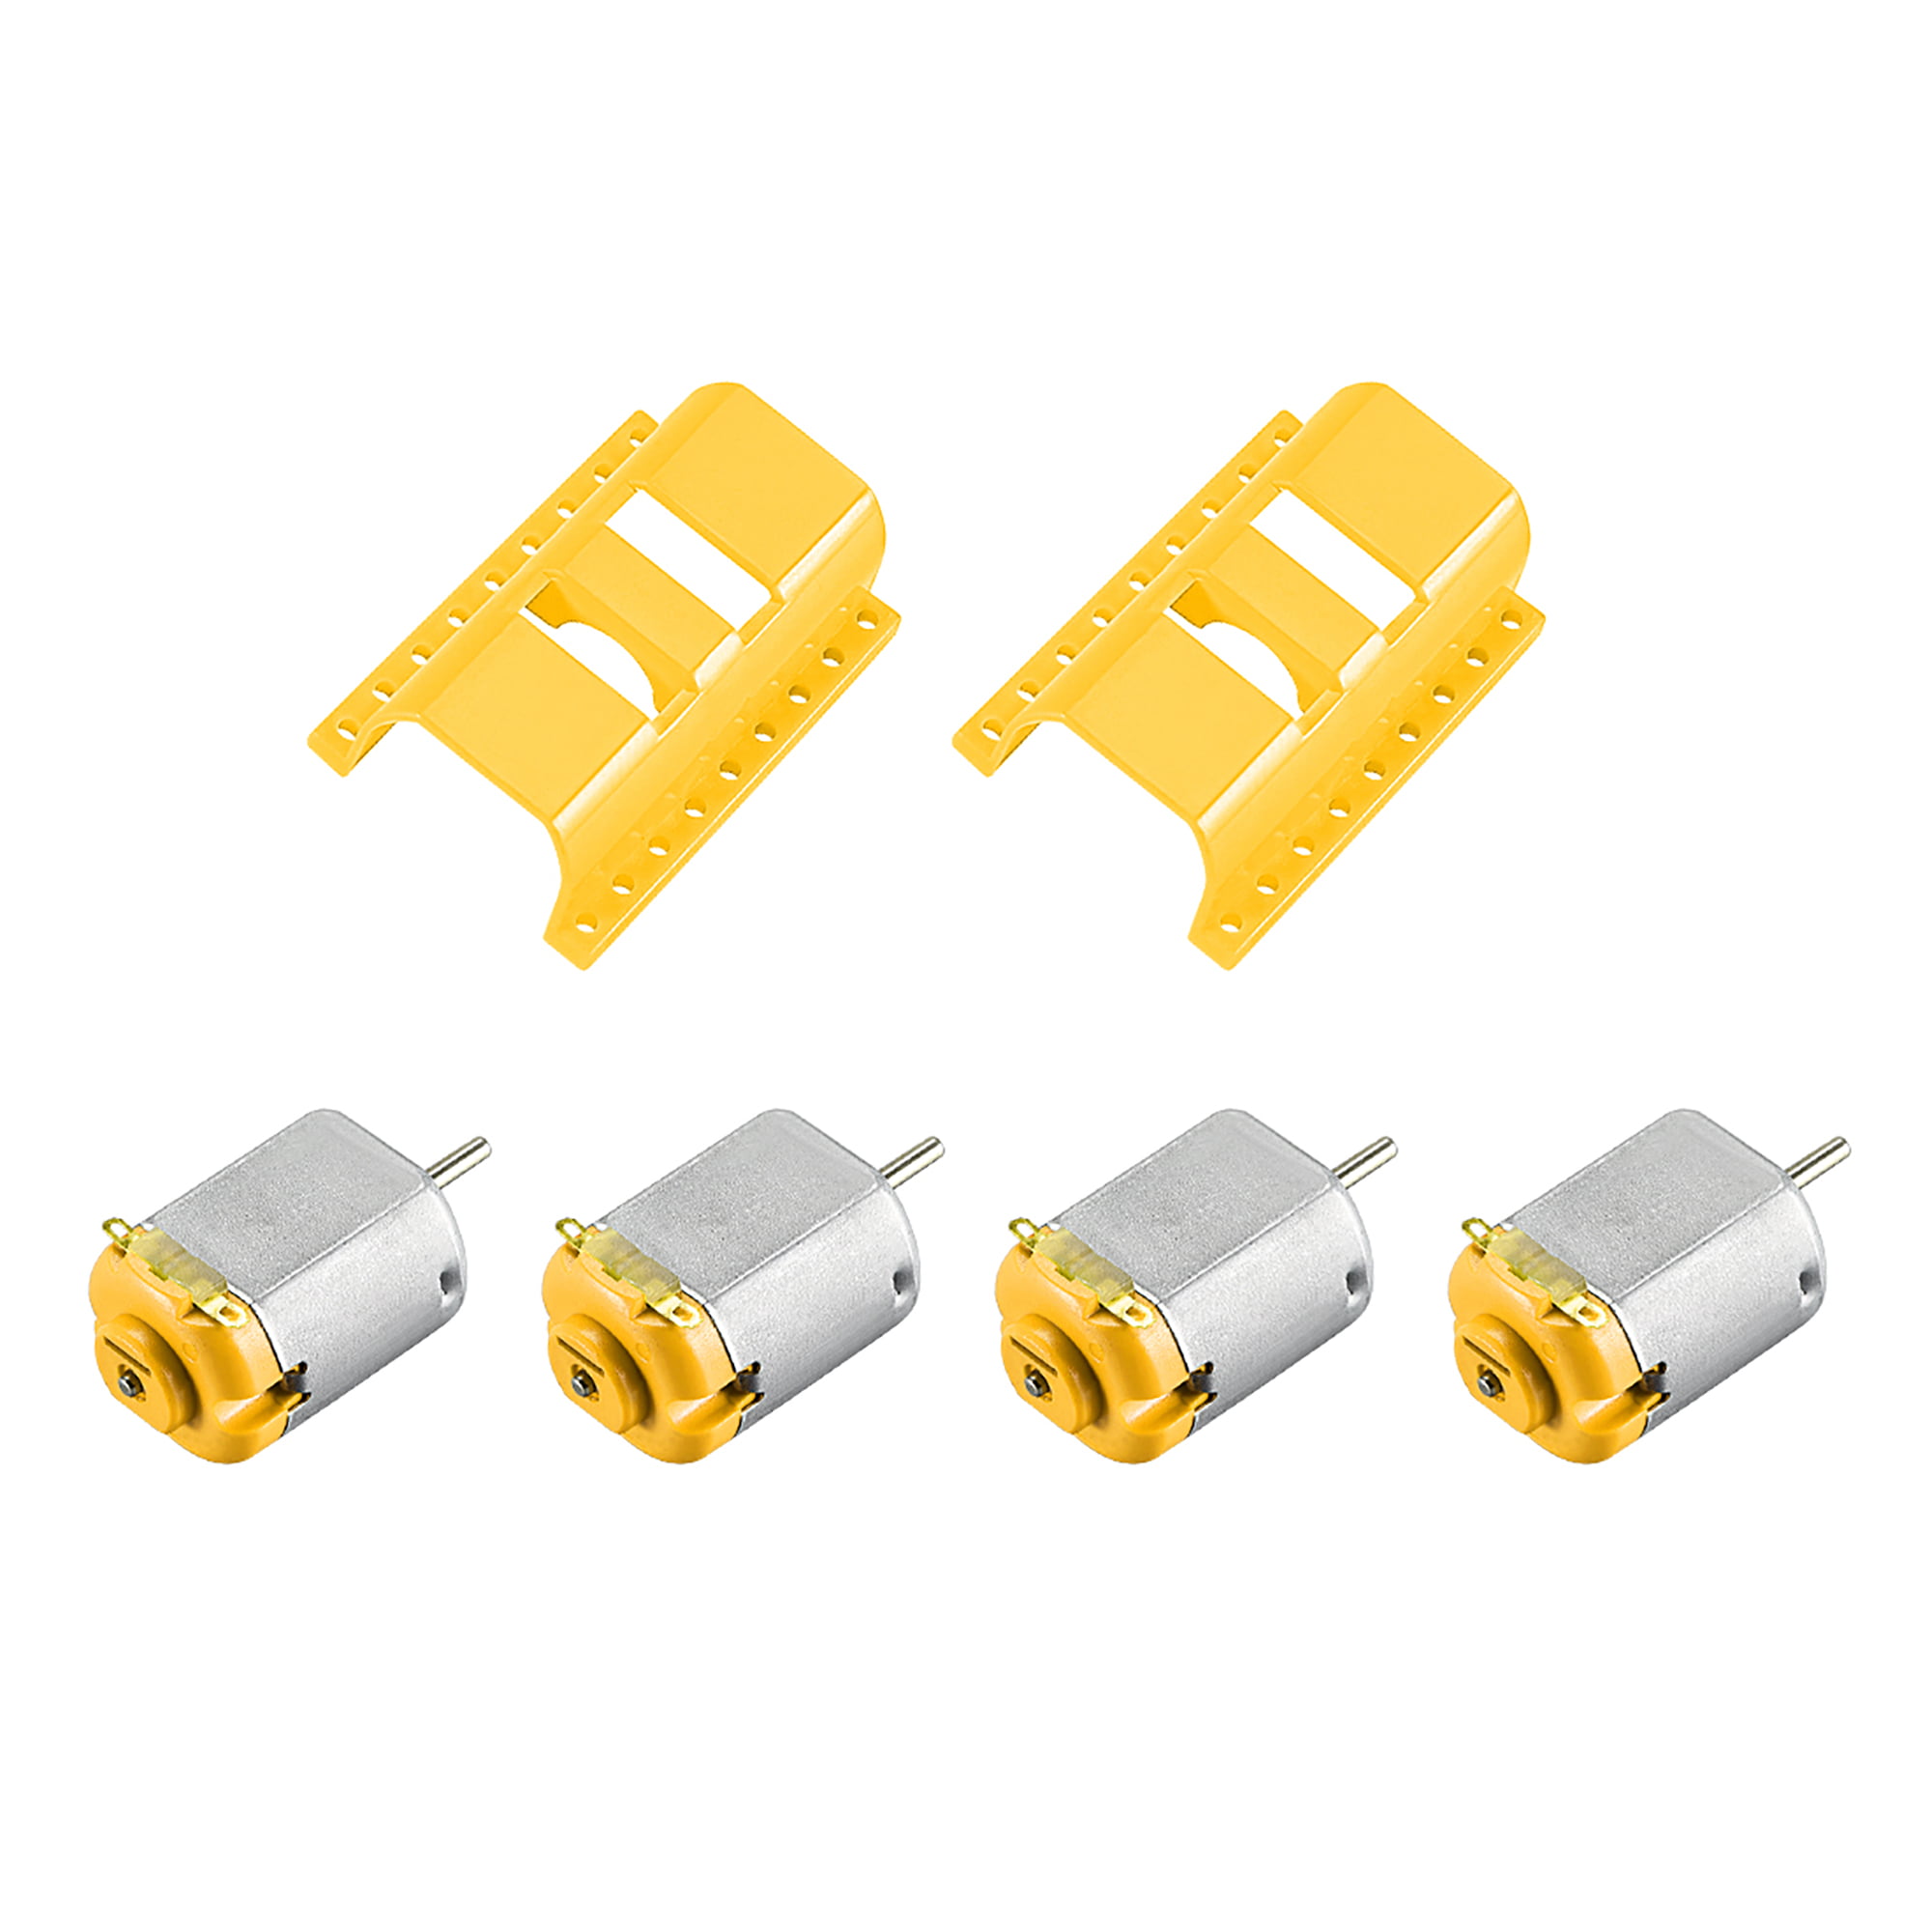 ELECTRIC MOTOR RE 140-3 VOLT BULK BUY PACK OF 5 WITH MOUNTING CLIP 